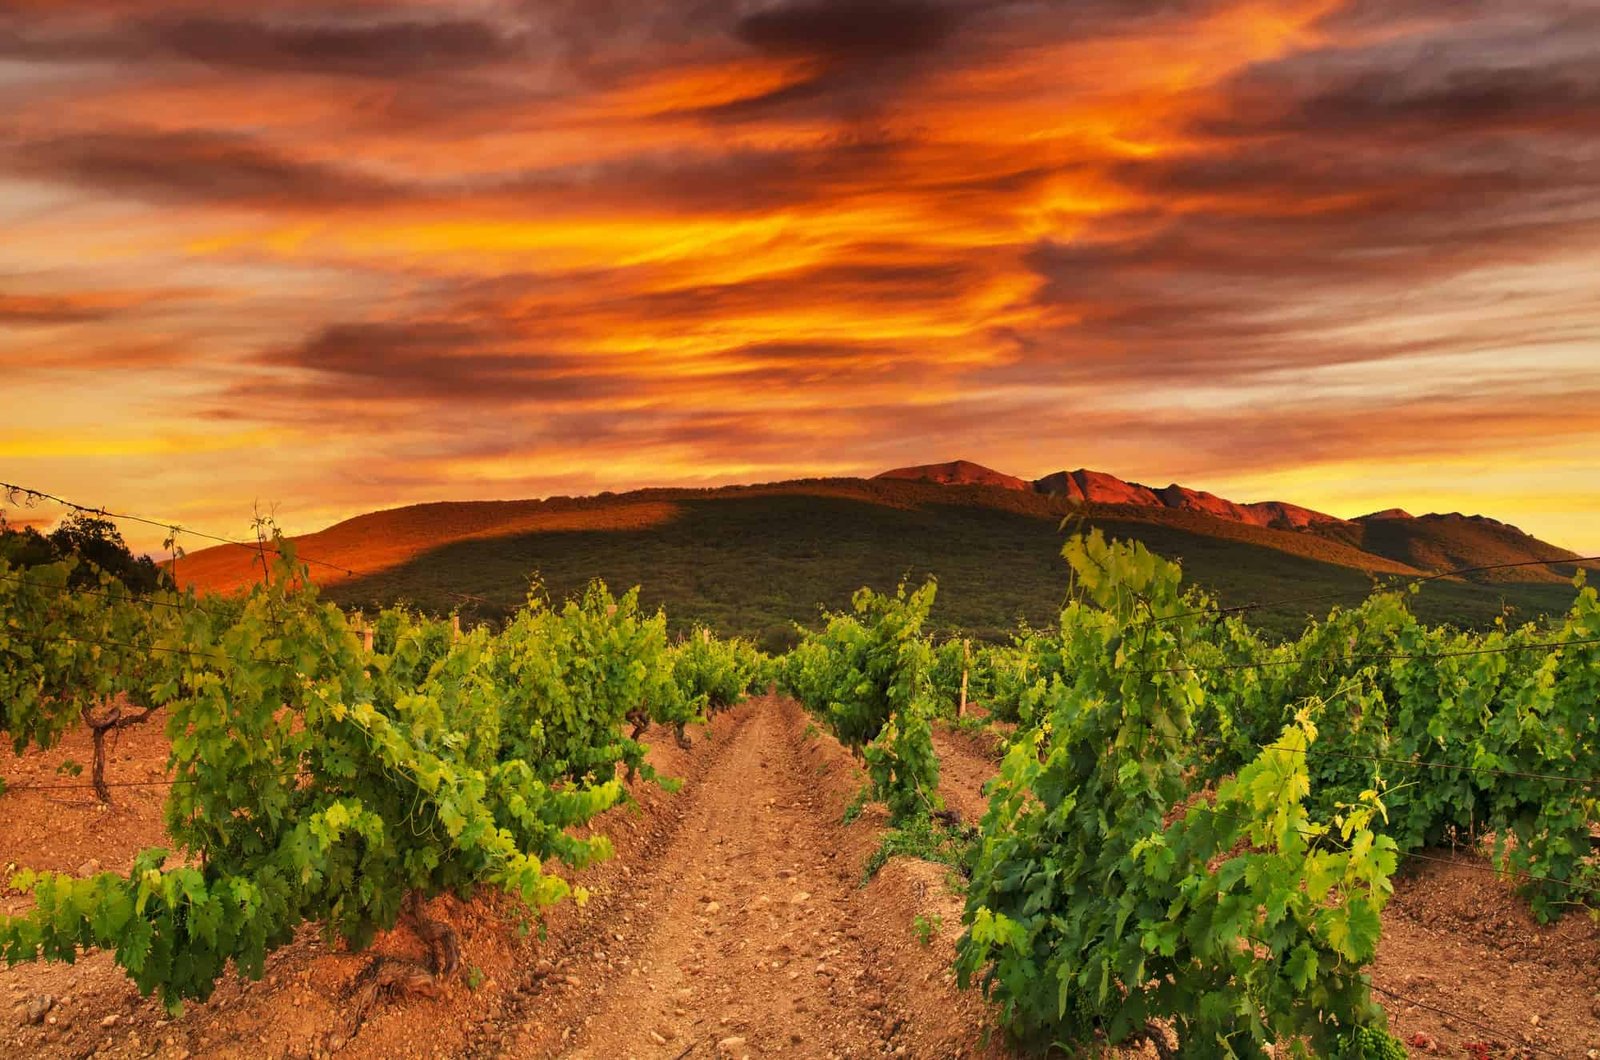 Vineyards at sunset. Spain, Rioja. Tourism and winemaking in Spain